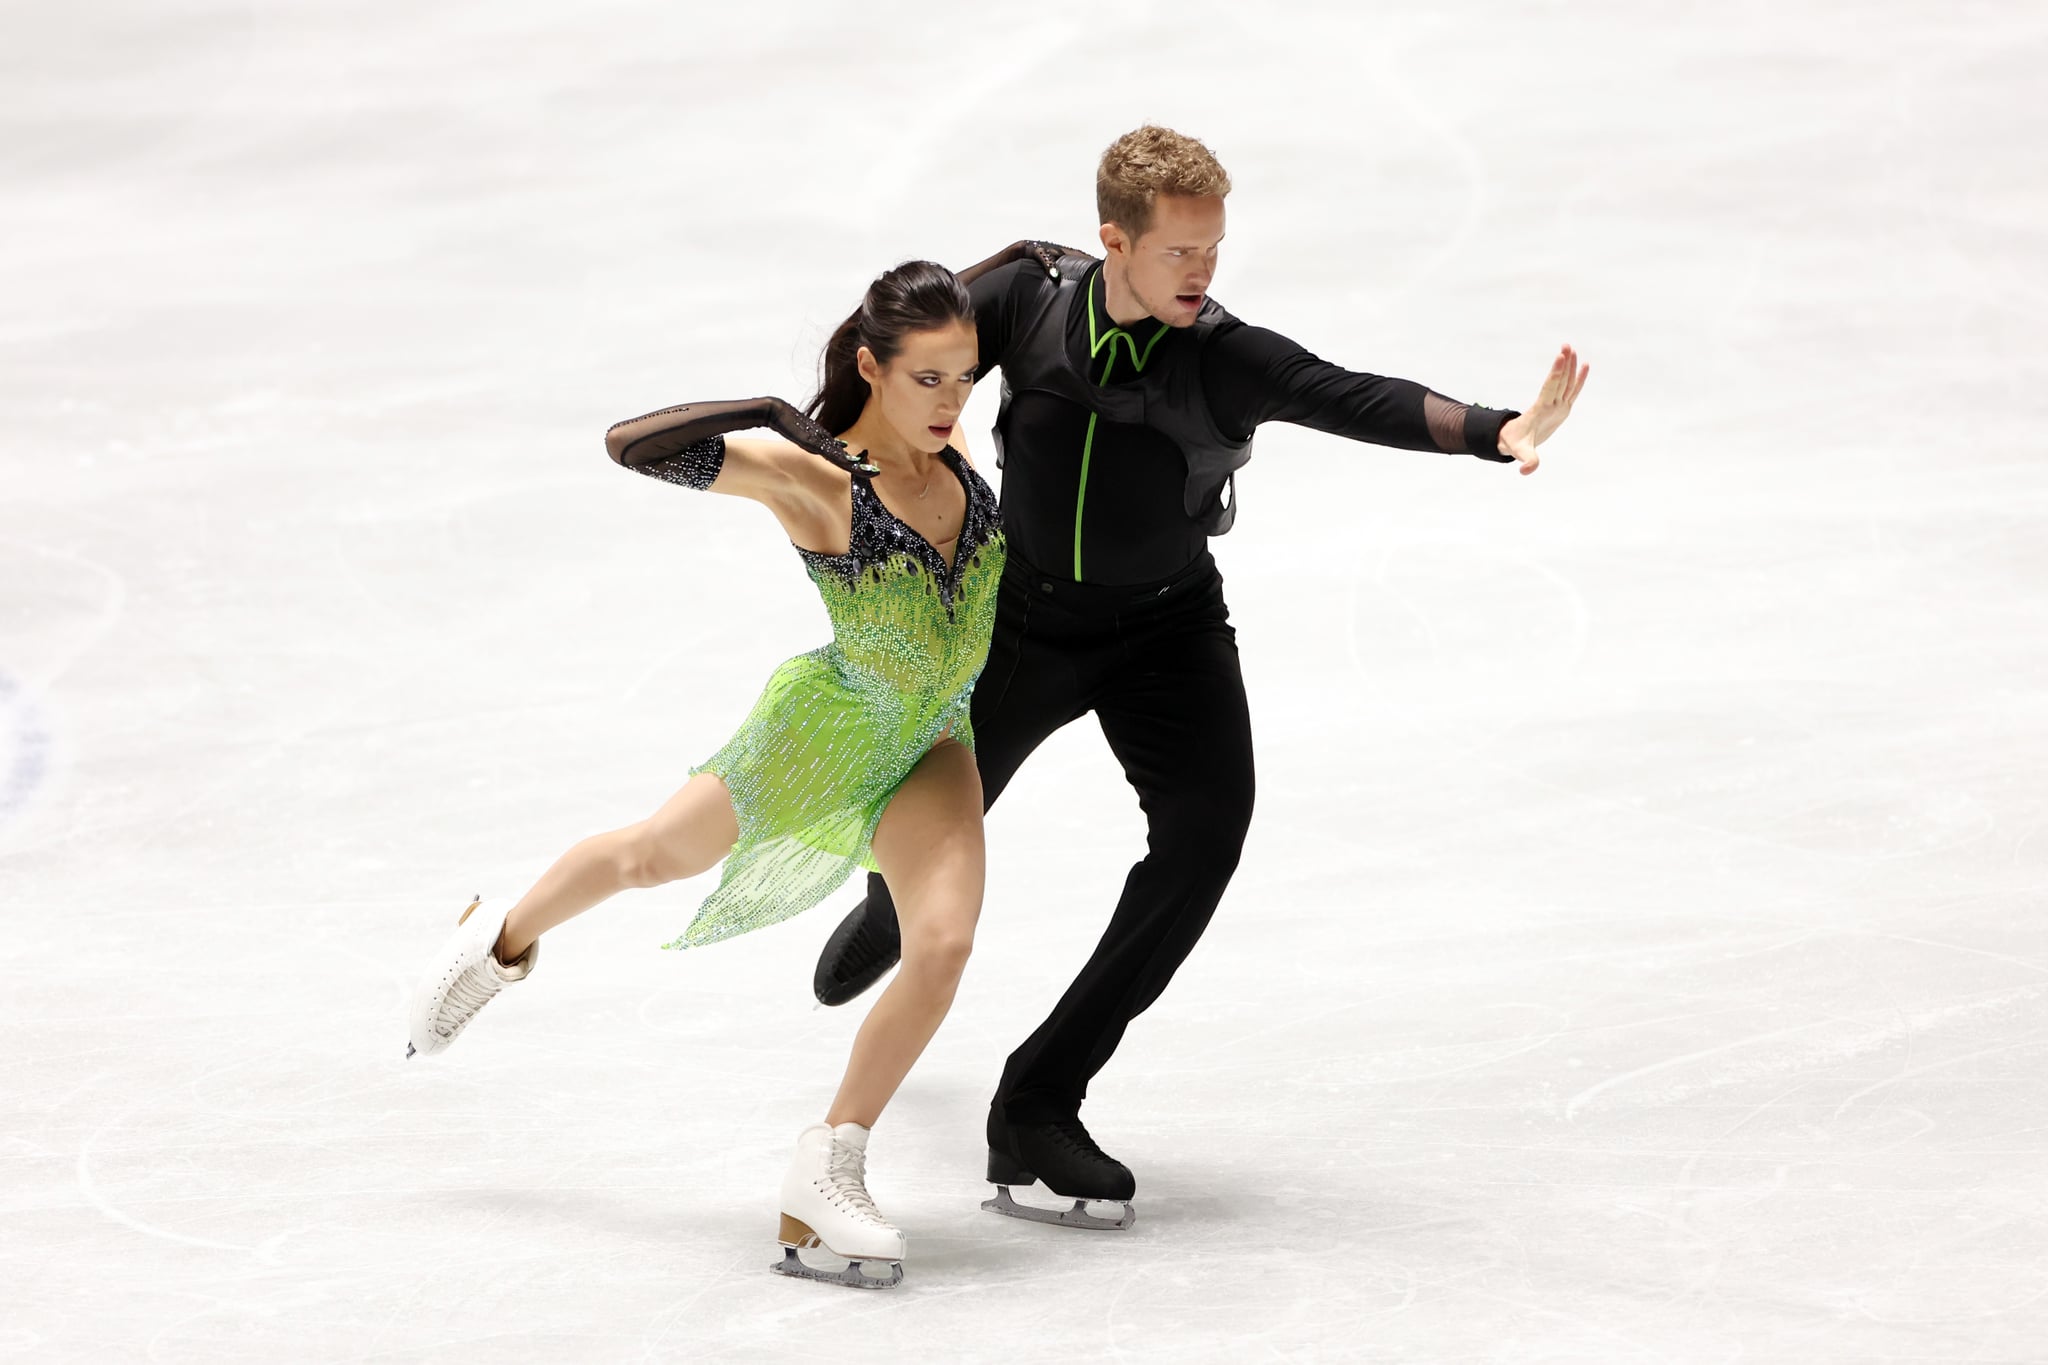 Madison Chock and Evan Bates of the United States compete in the Ice Dance Rhythm Dance during the ISU Grand Prix of Figure Skating - NHK Trophy at Yoyogi National Gymnasium on November 12, 2021 in Tokyo, Japan.